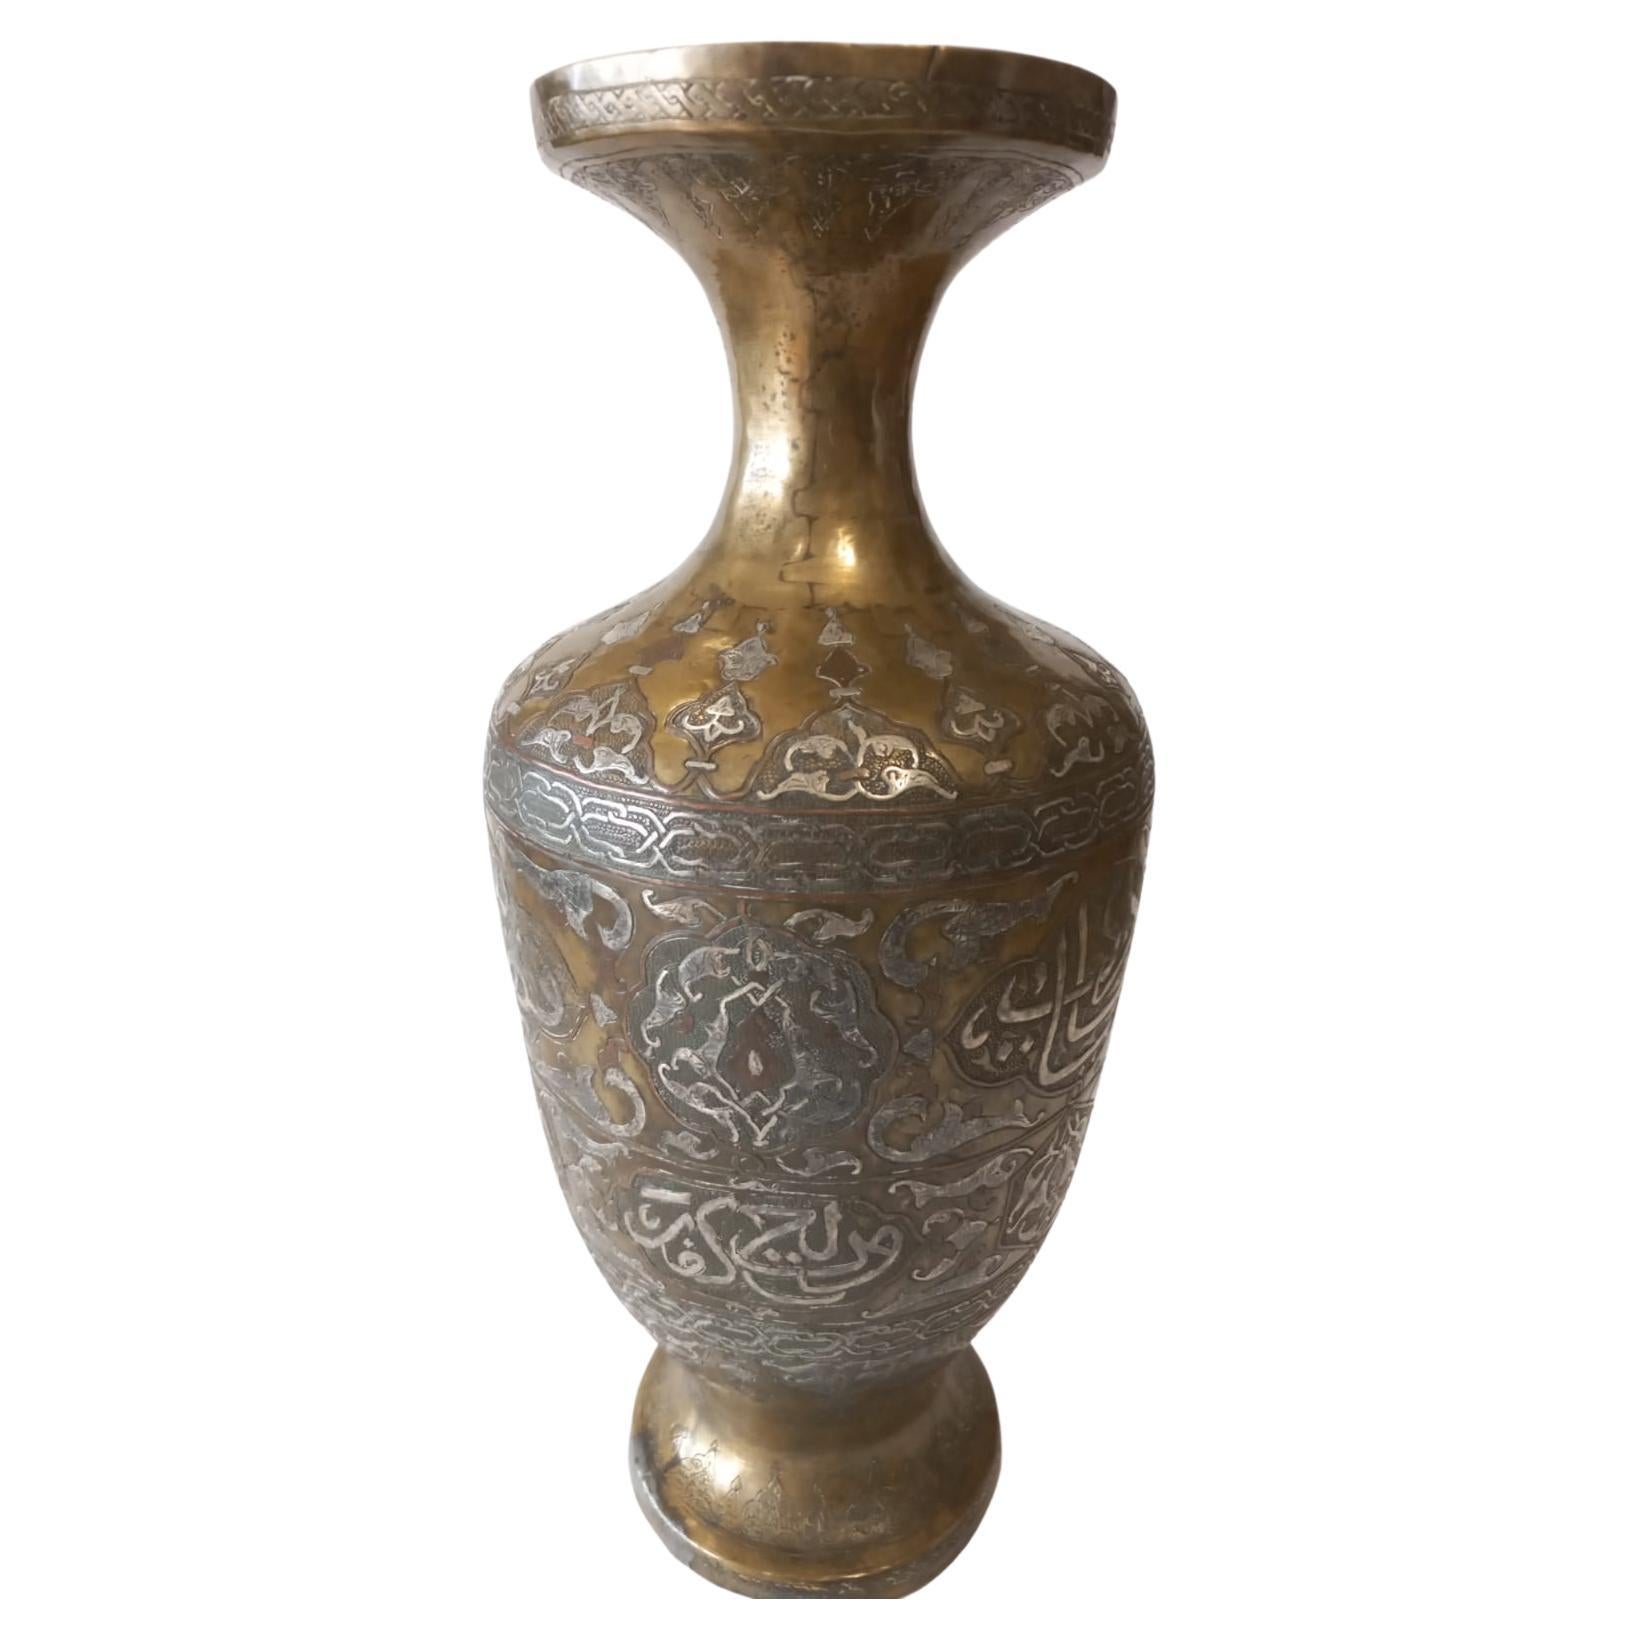 Rare Antique Persian Islamic Brass Vase with Silver Inlay 19th Century